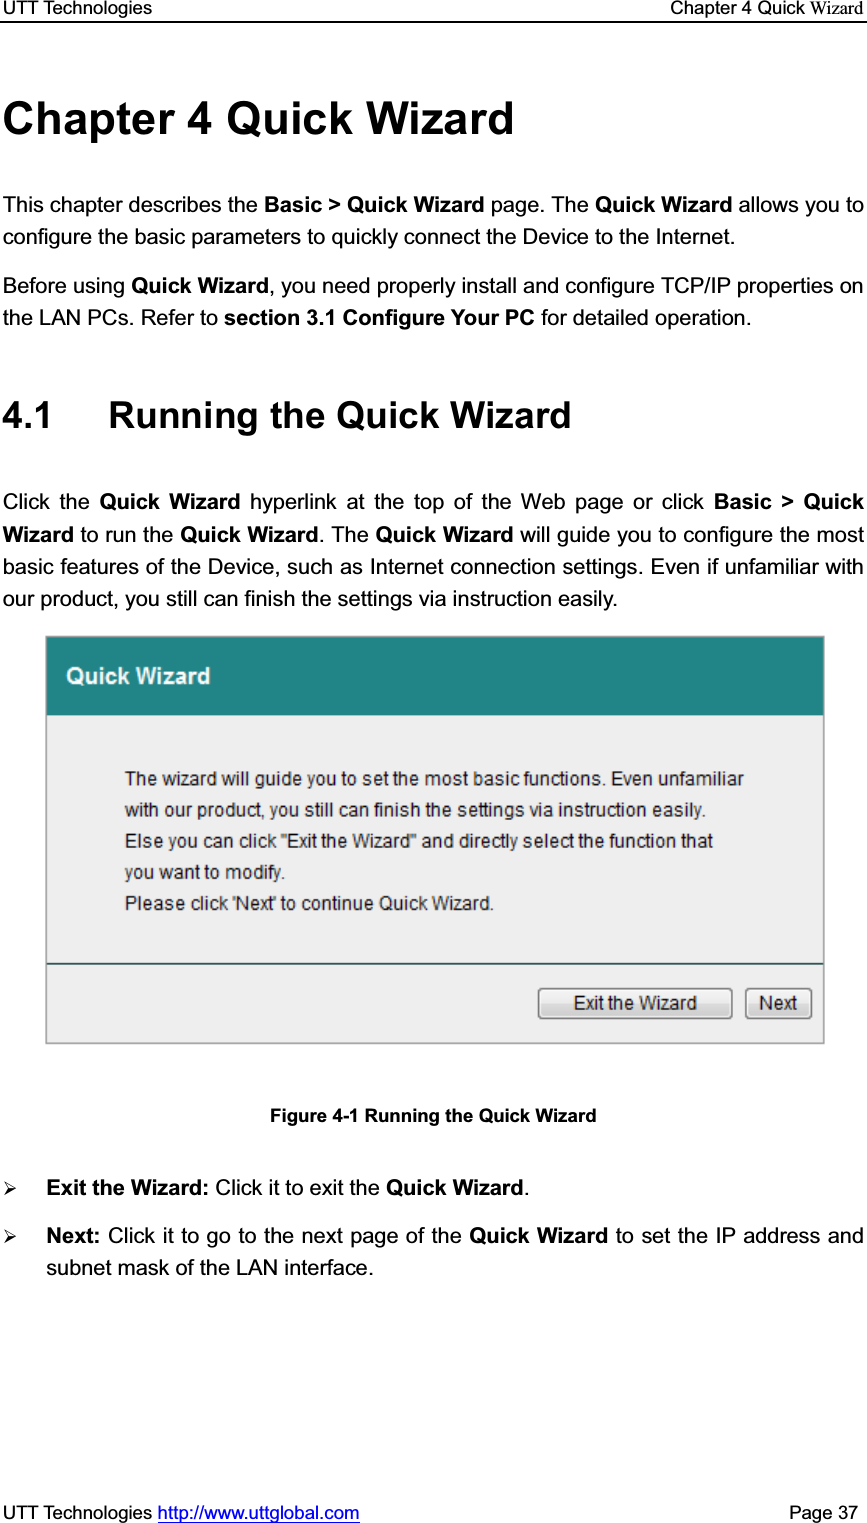 UTT Technologies    Chapter 4 Quick WizardUTT Technologies http://www.uttglobal.com                                              Page 37 Chapter 4 Quick Wizard This chapter describes the Basic &gt; Quick Wizard page. The Quick Wizard allows you to configure the basic parameters to quickly connect the Device to the Internet.   Before using Quick Wizard, you need properly install and configure TCP/IP properties on the LAN PCs. Refer to section 3.1 Configure Your PC for detailed operation. 4.1 Running the Quick Wizard  Click the Quick Wizard hyperlink at the top of the Web page or click Basic &gt; Quick Wizard to run the Quick Wizard. The Quick Wizard will guide you to configure the most basic features of the Device, such as Internet connection settings. Even if unfamiliar with our product, you still can finish the settings via instruction easily.   Figure 4-1 Running the Quick Wizard ¾Exit the Wizard: Click it to exit the Quick Wizard.¾Next: Click it to go to the next page of the Quick Wizard to set the IP address and subnet mask of the LAN interface.